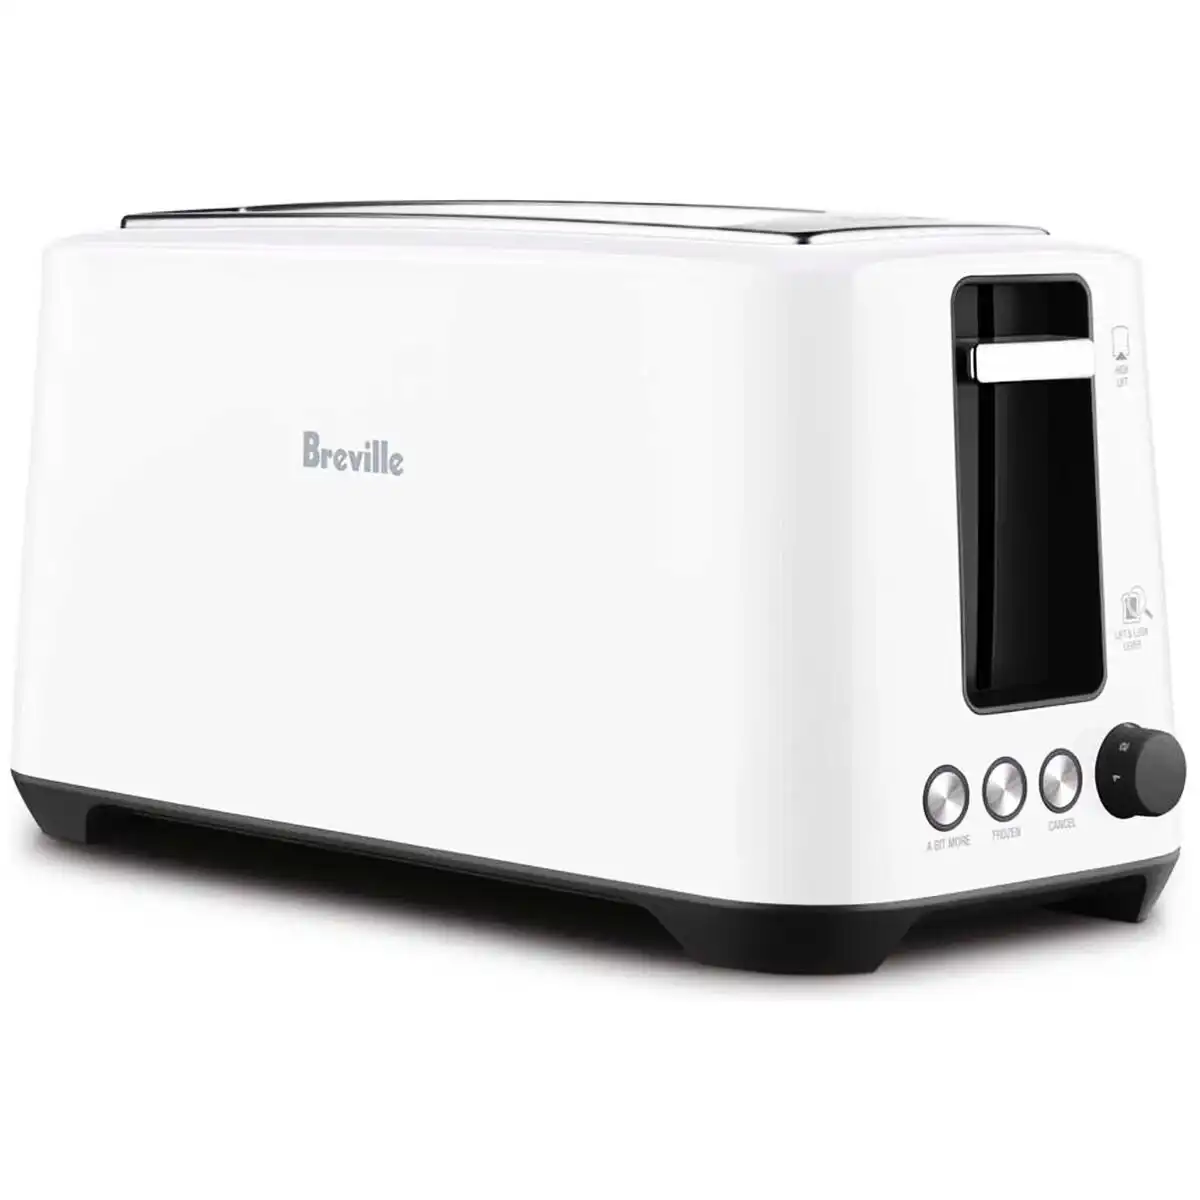 Breville the Lift & Look Plus 4 Slice Toaster